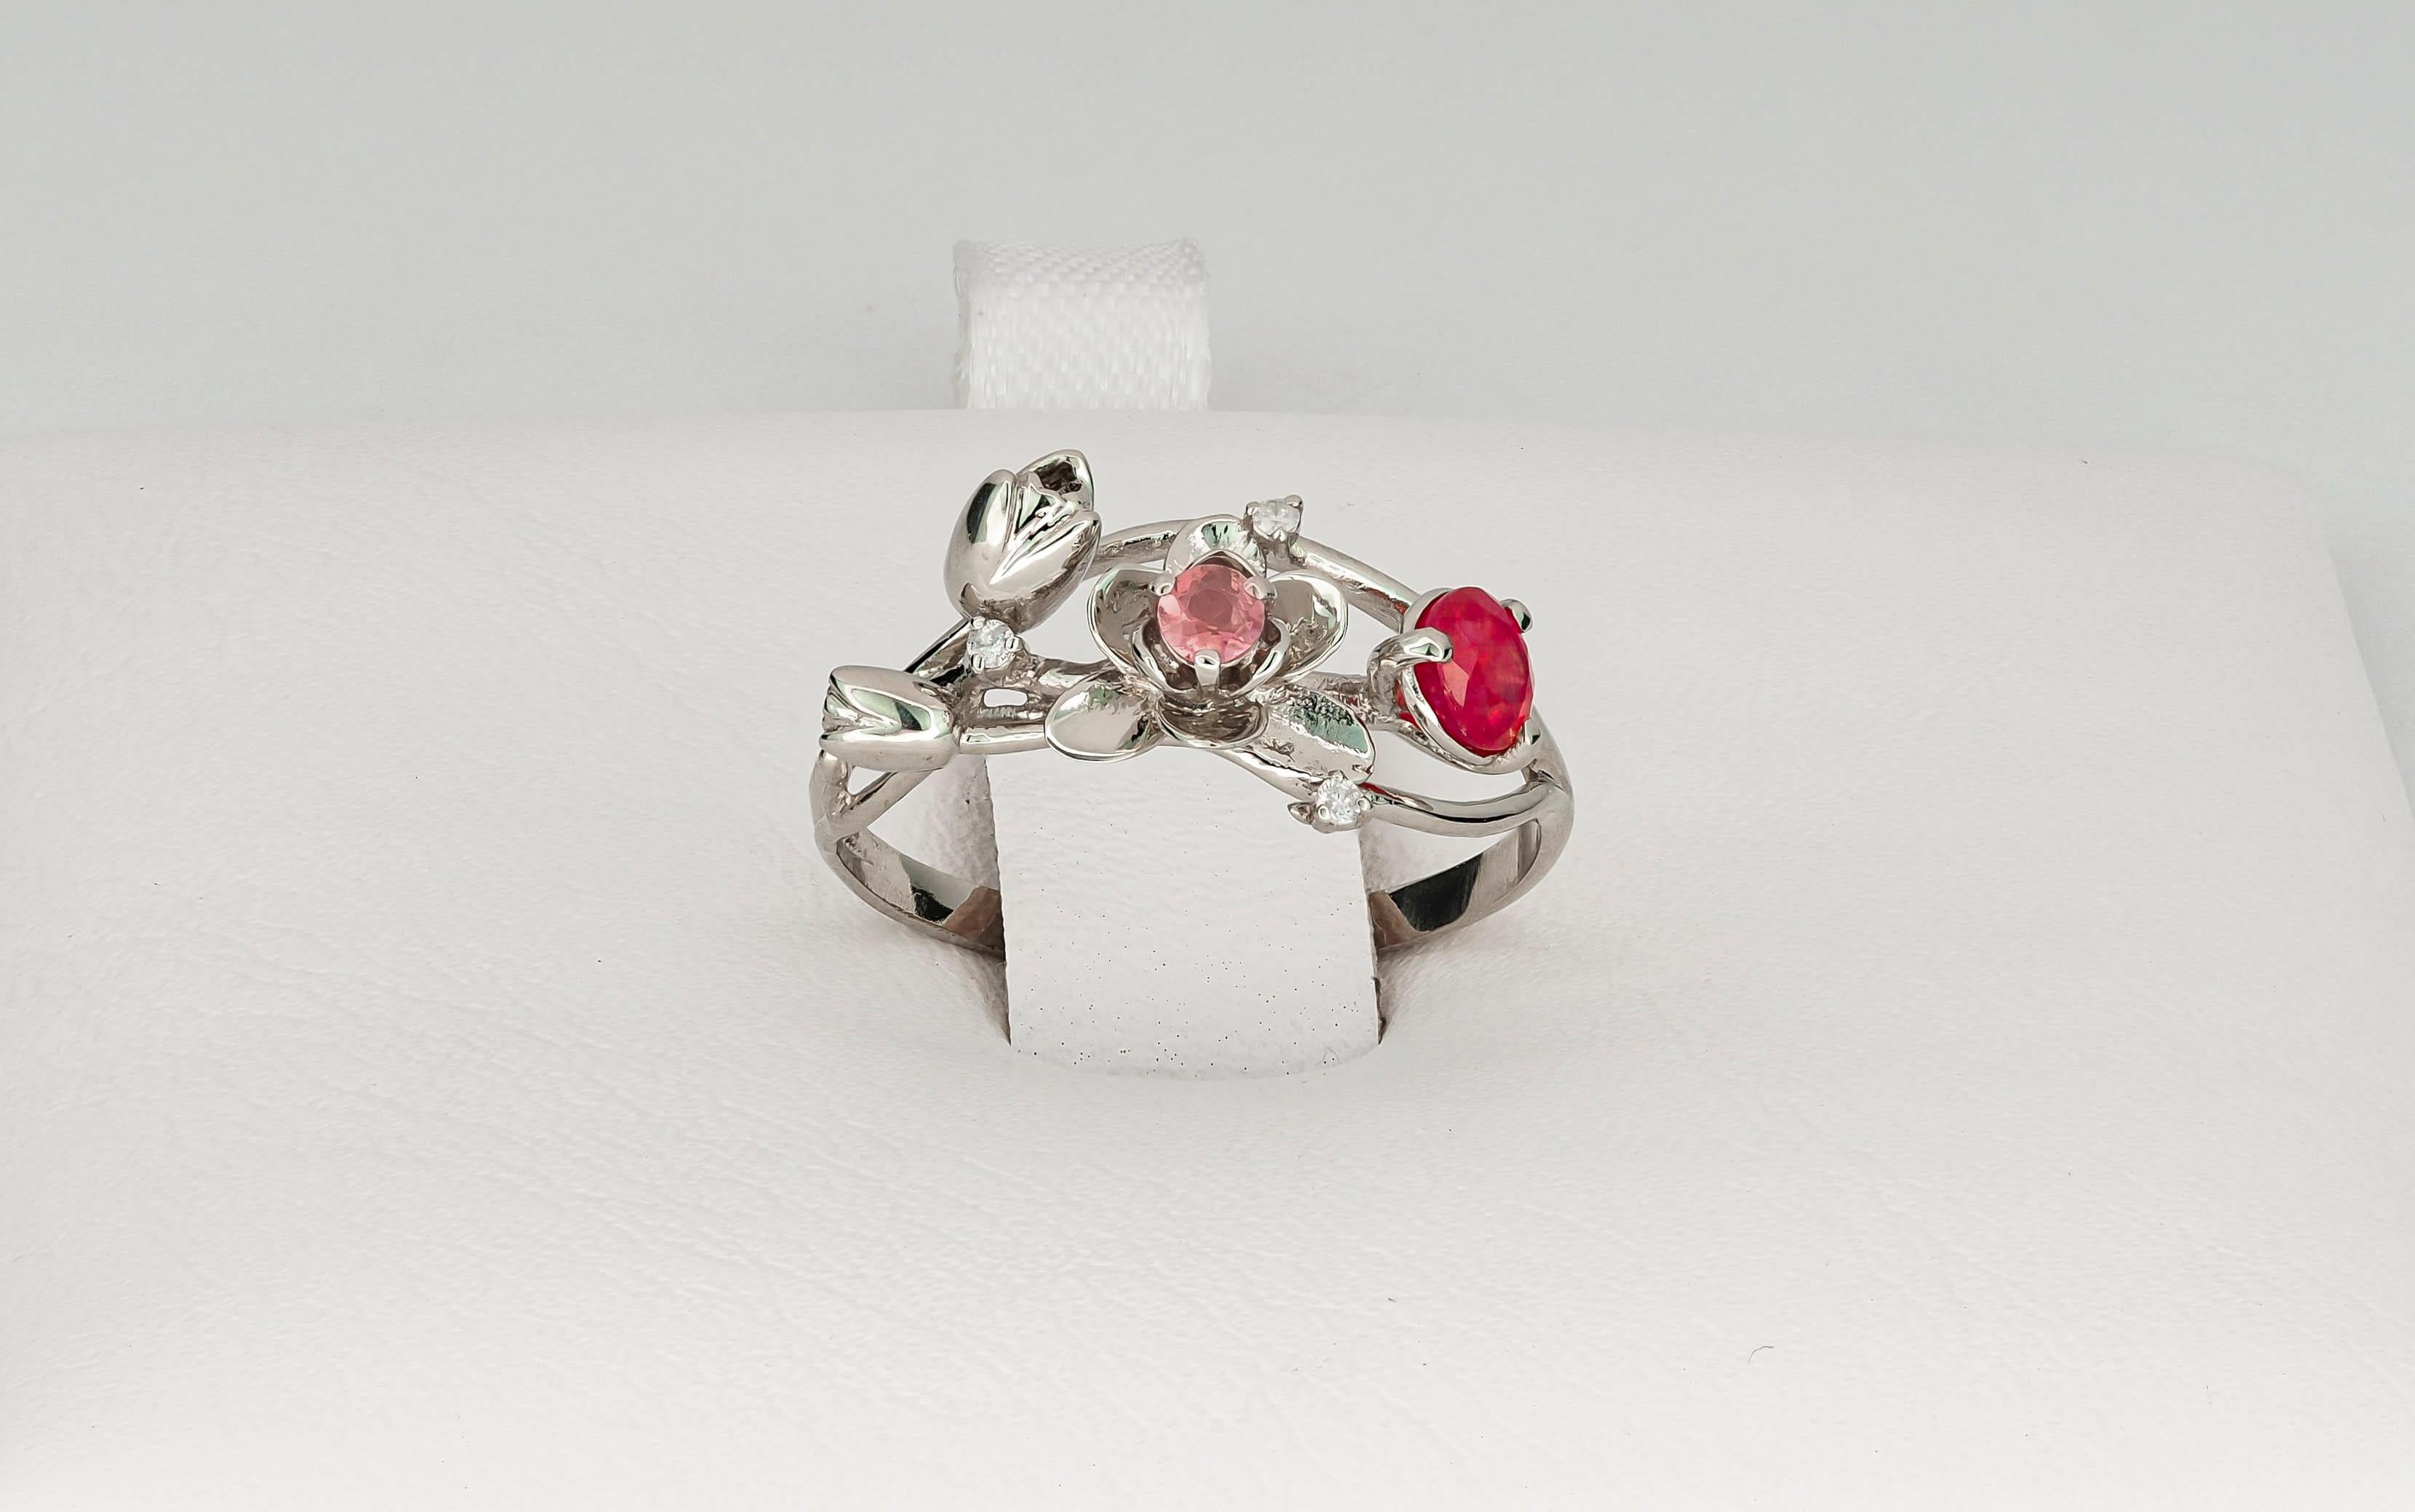 14 Karat White Gold Ring with Ruby, Sapphire and Diamonds. Orchid Gold Ring 2